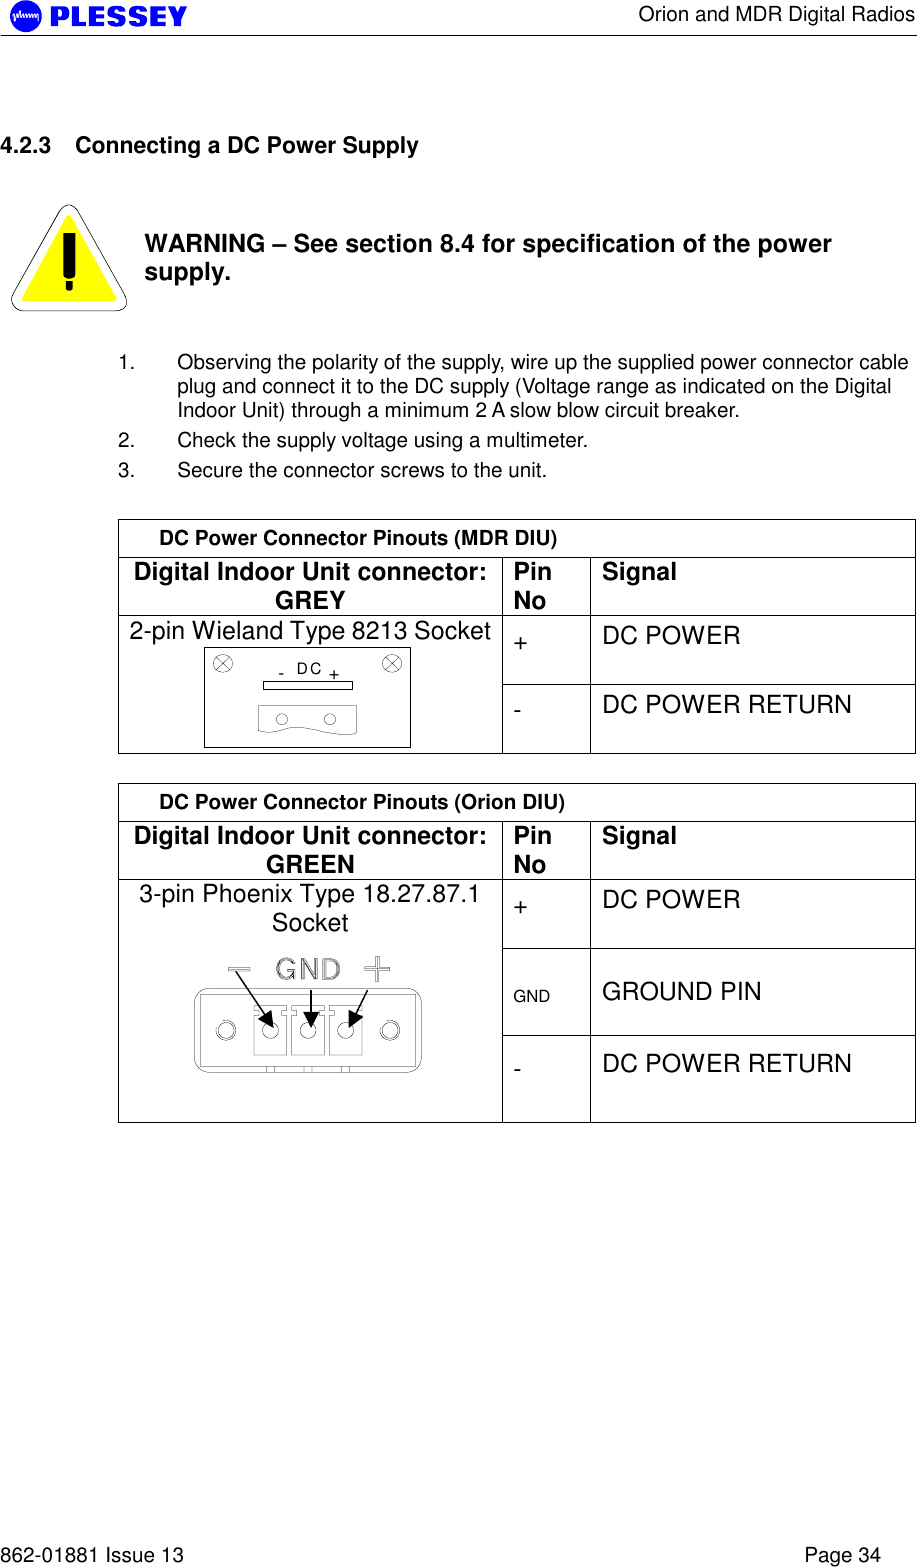      Orion and MDR Digital Radios   862-01881 Issue 13    Page 34 4.2.3  Connecting a DC Power Supply    WARNING – See section 8.4 for specification of the power supply.  1.  Observing the polarity of the supply, wire up the supplied power connector cable plug and connect it to the DC supply (Voltage range as indicated on the Digital Indoor Unit) through a minimum 2 A slow blow circuit breaker. 2.  Check the supply voltage using a multimeter. 3.  Secure the connector screws to the unit.  DC Power Connector Pinouts (MDR DIU) Digital Indoor Unit connector: GREY  Pin No  Signal +  DC POWER  2-pin Wieland Type 8213 Socket-+DC -  DC POWER RETURN   DC Power Connector Pinouts (Orion DIU) Digital Indoor Unit connector: GREEN  Pin No  Signal +  DC POWER  GND  GROUND PIN 3-pin Phoenix Type 18.27.87.1 Socket  -  DC POWER RETURN   